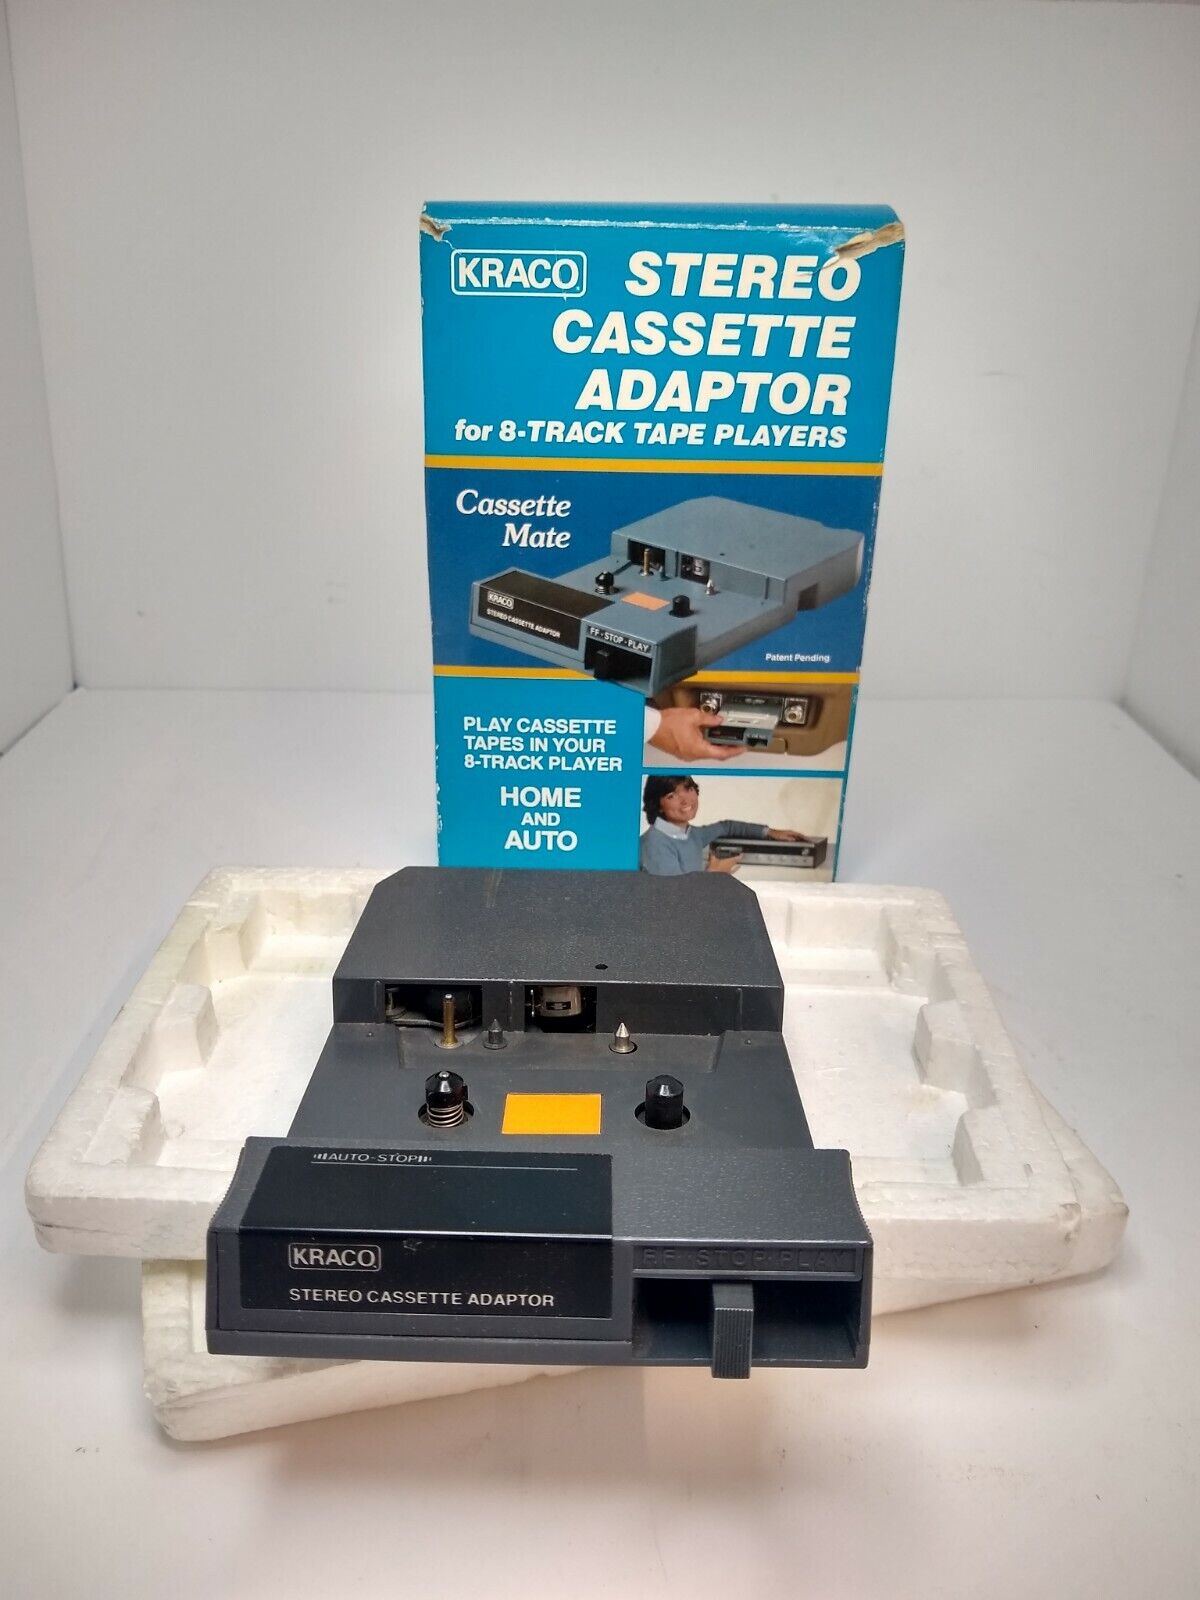 Vintage Kraco Stereo Cassette Adaptor For 8-Track Tape Players M